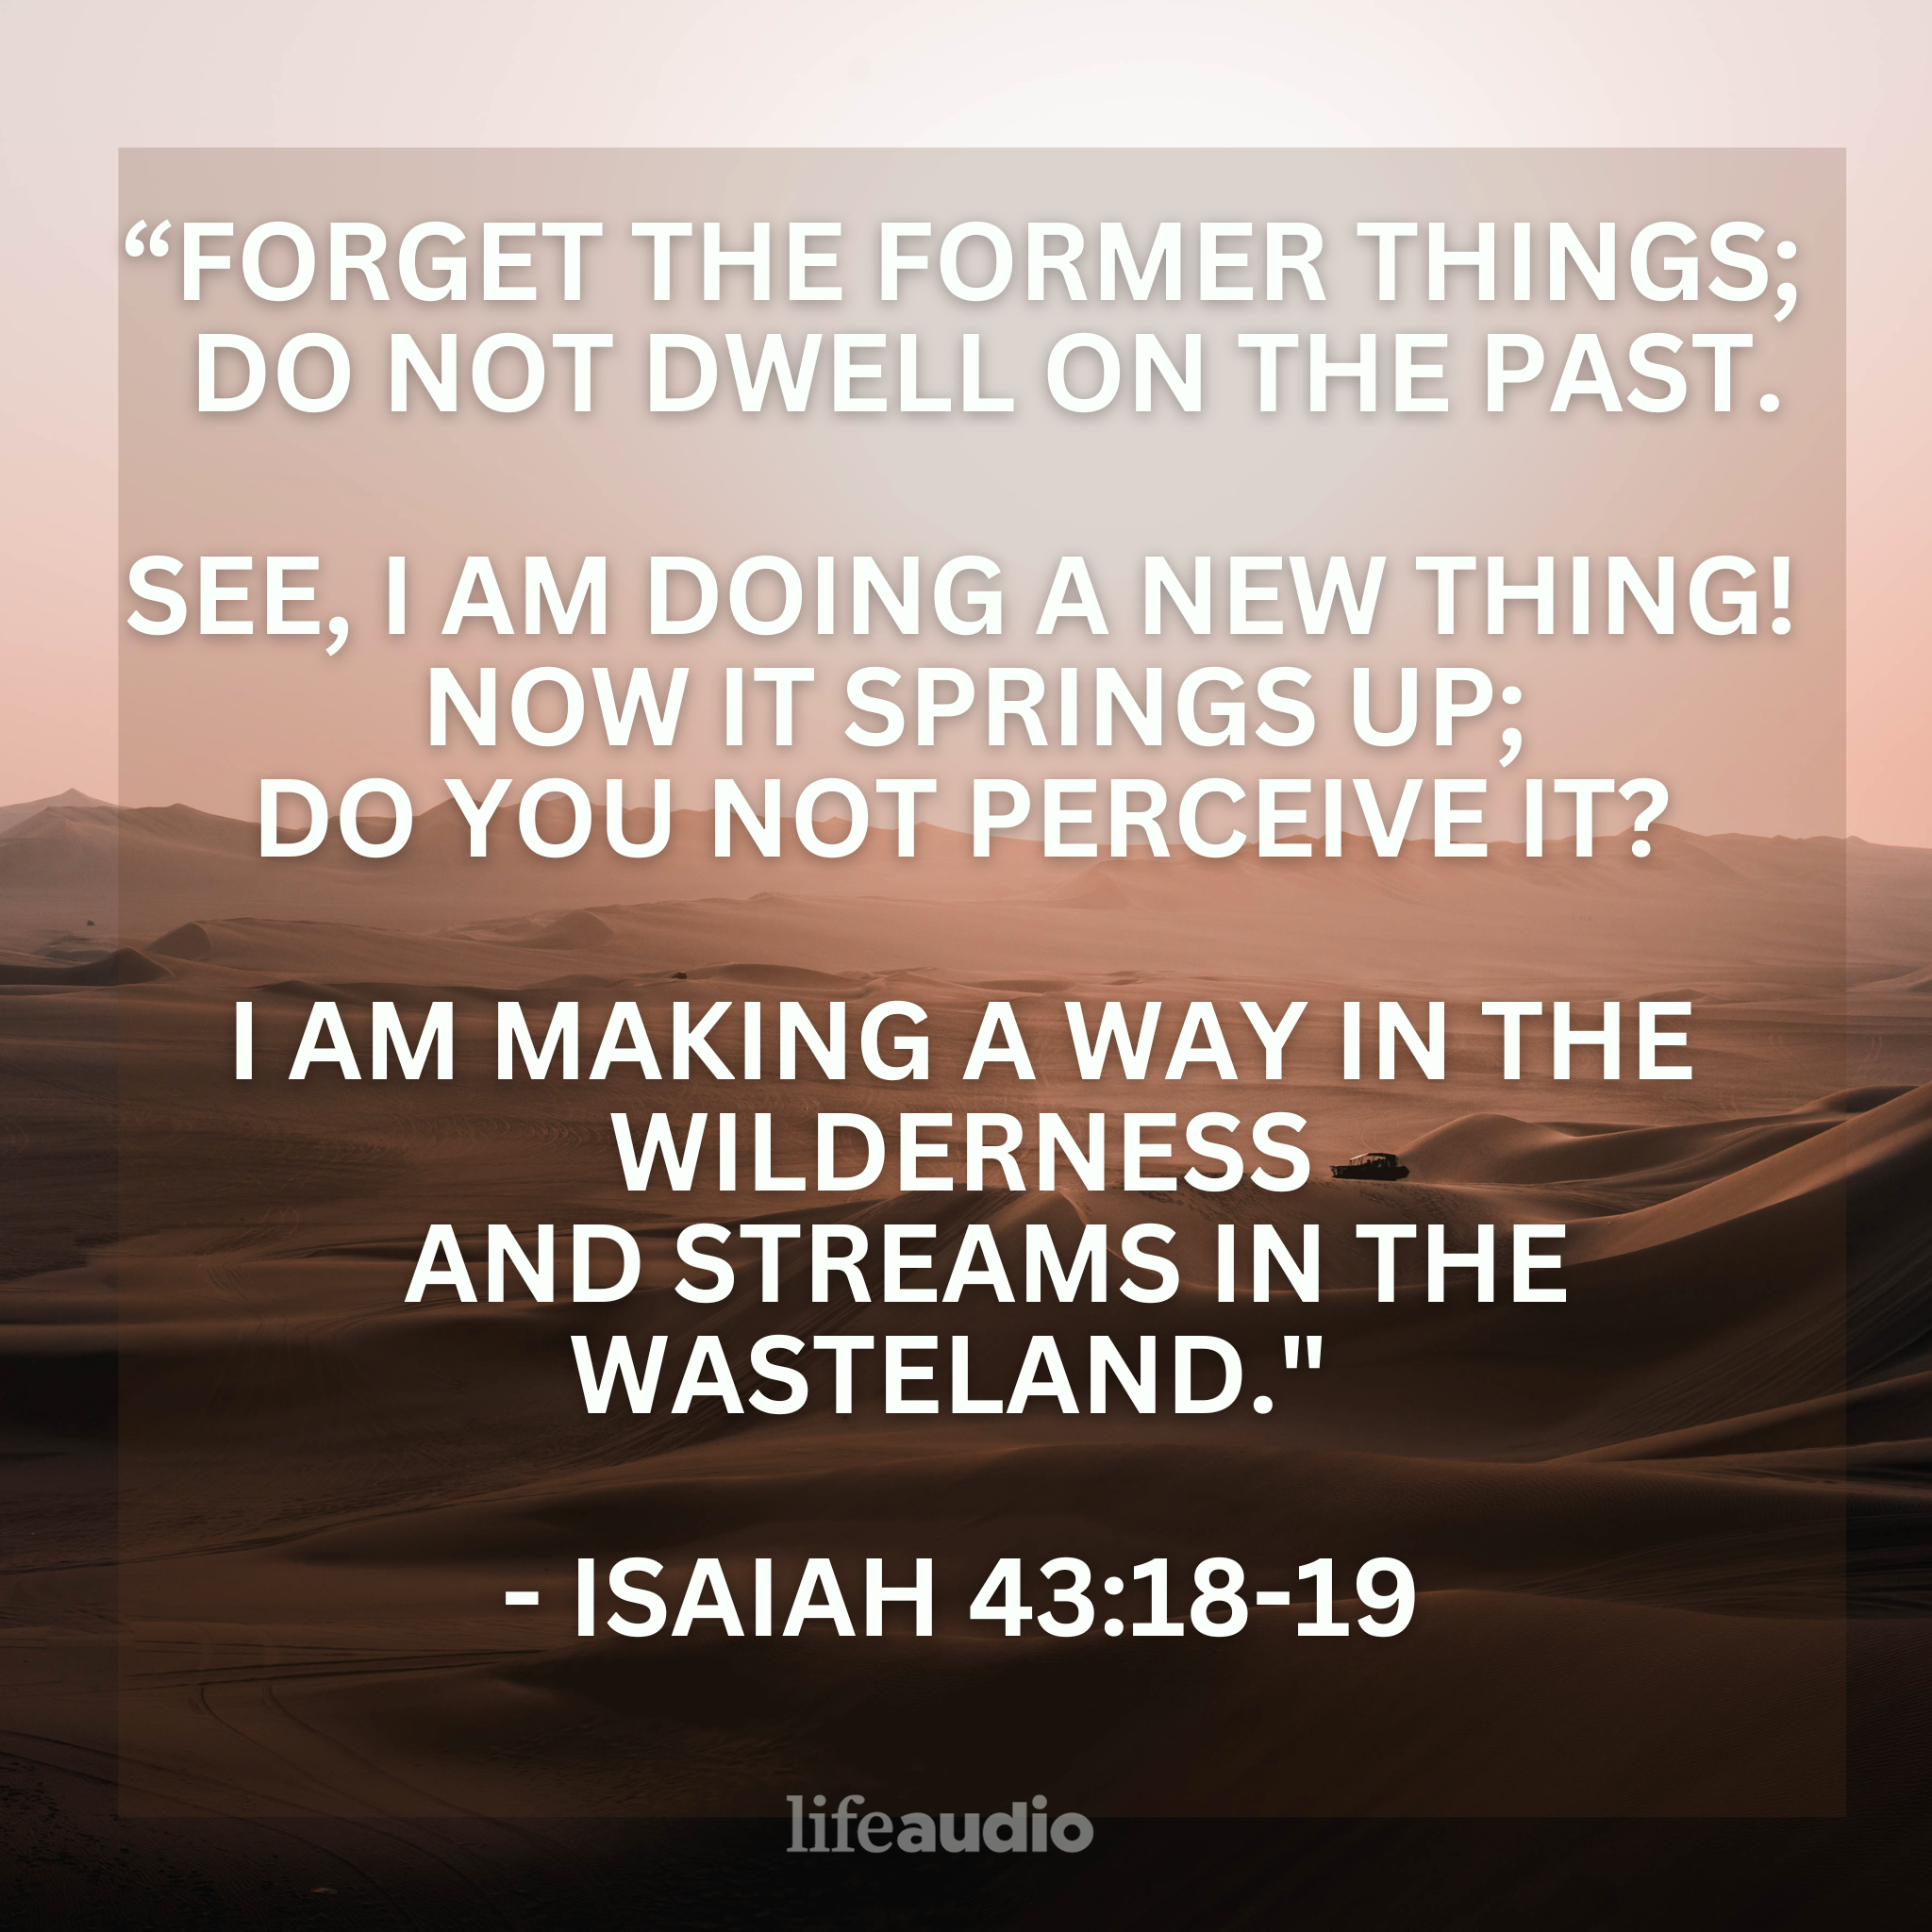 Already Feeling Stuck In the New Year? Meditate On This (Isaiah 43:18-19)